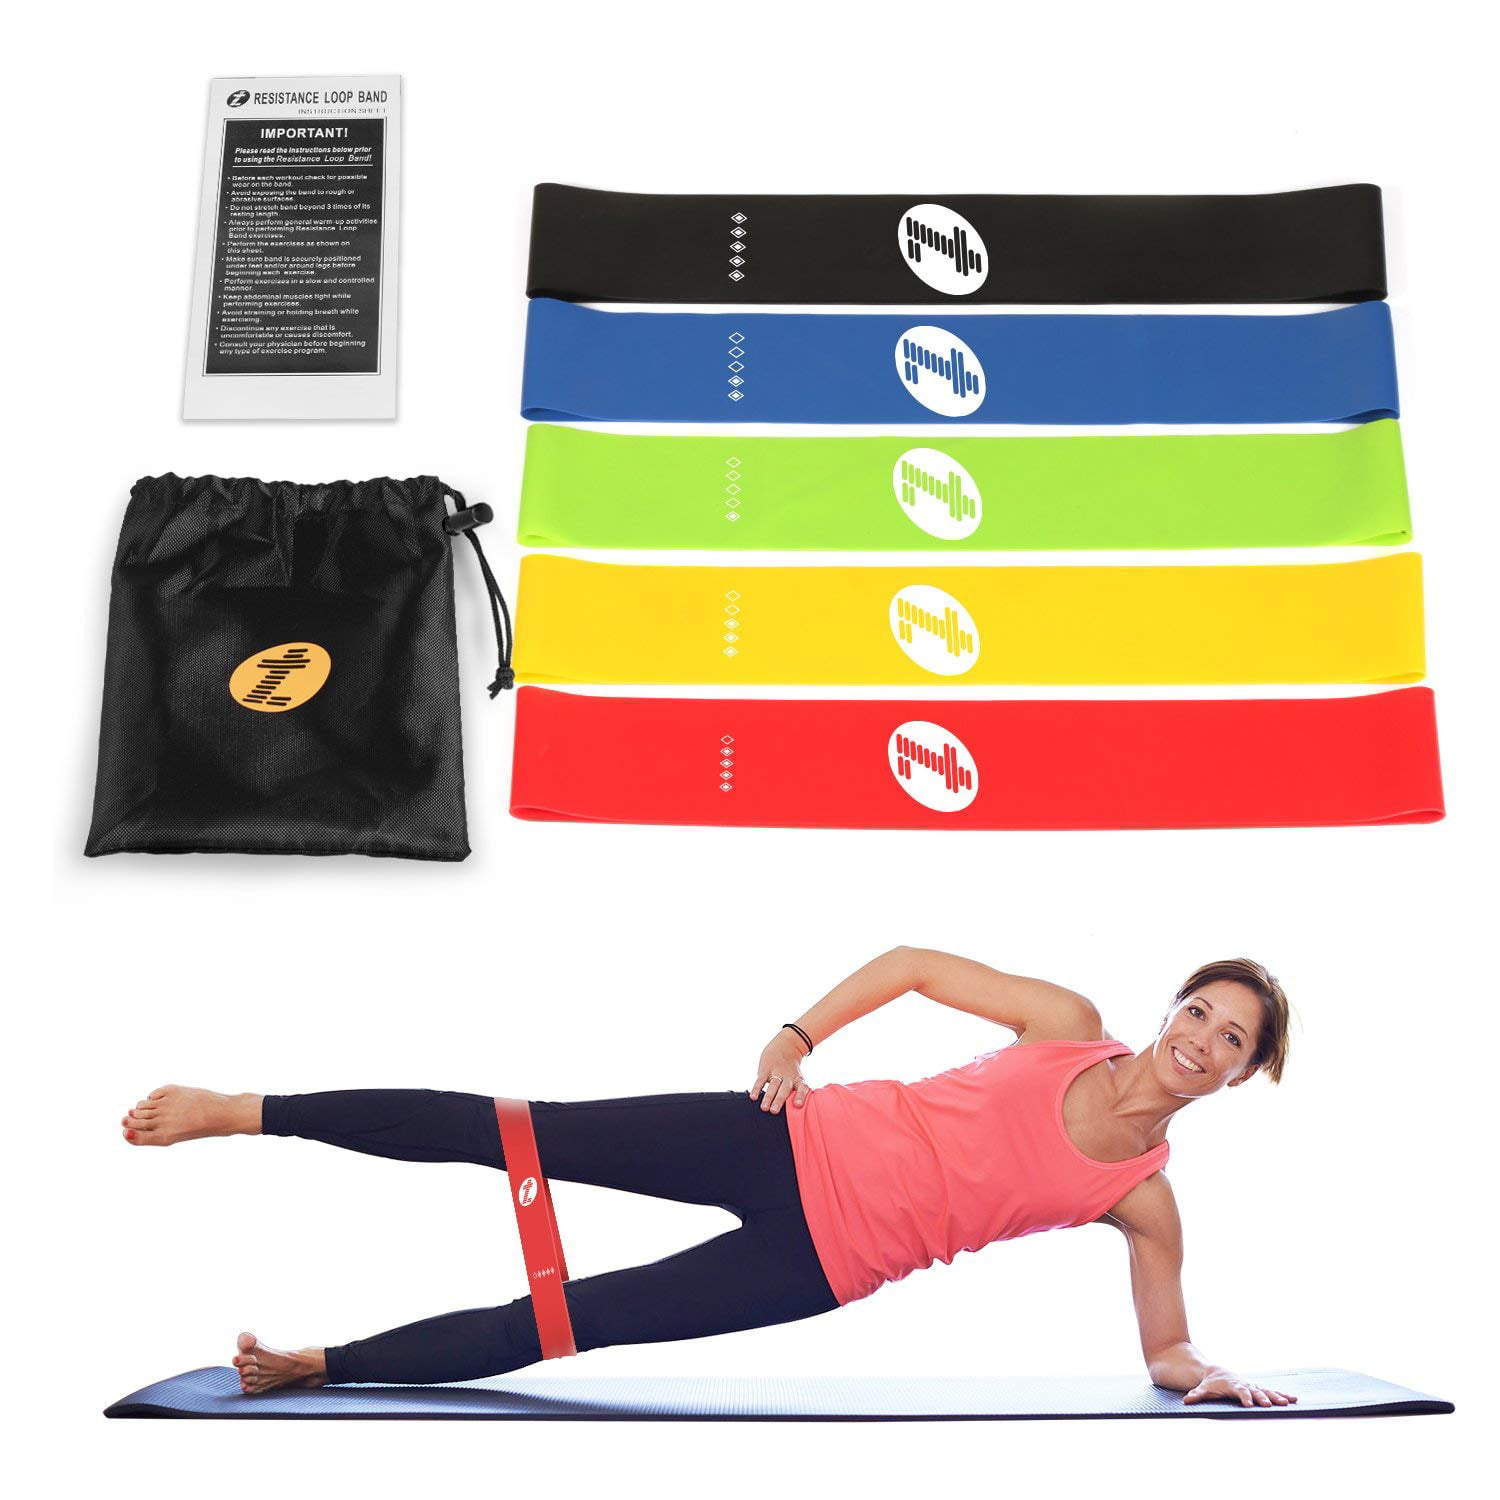 AU stock Heavy Duty Resistance Band Power Gym Fitness EXERCISE LOOP YOGA WORKOUT 